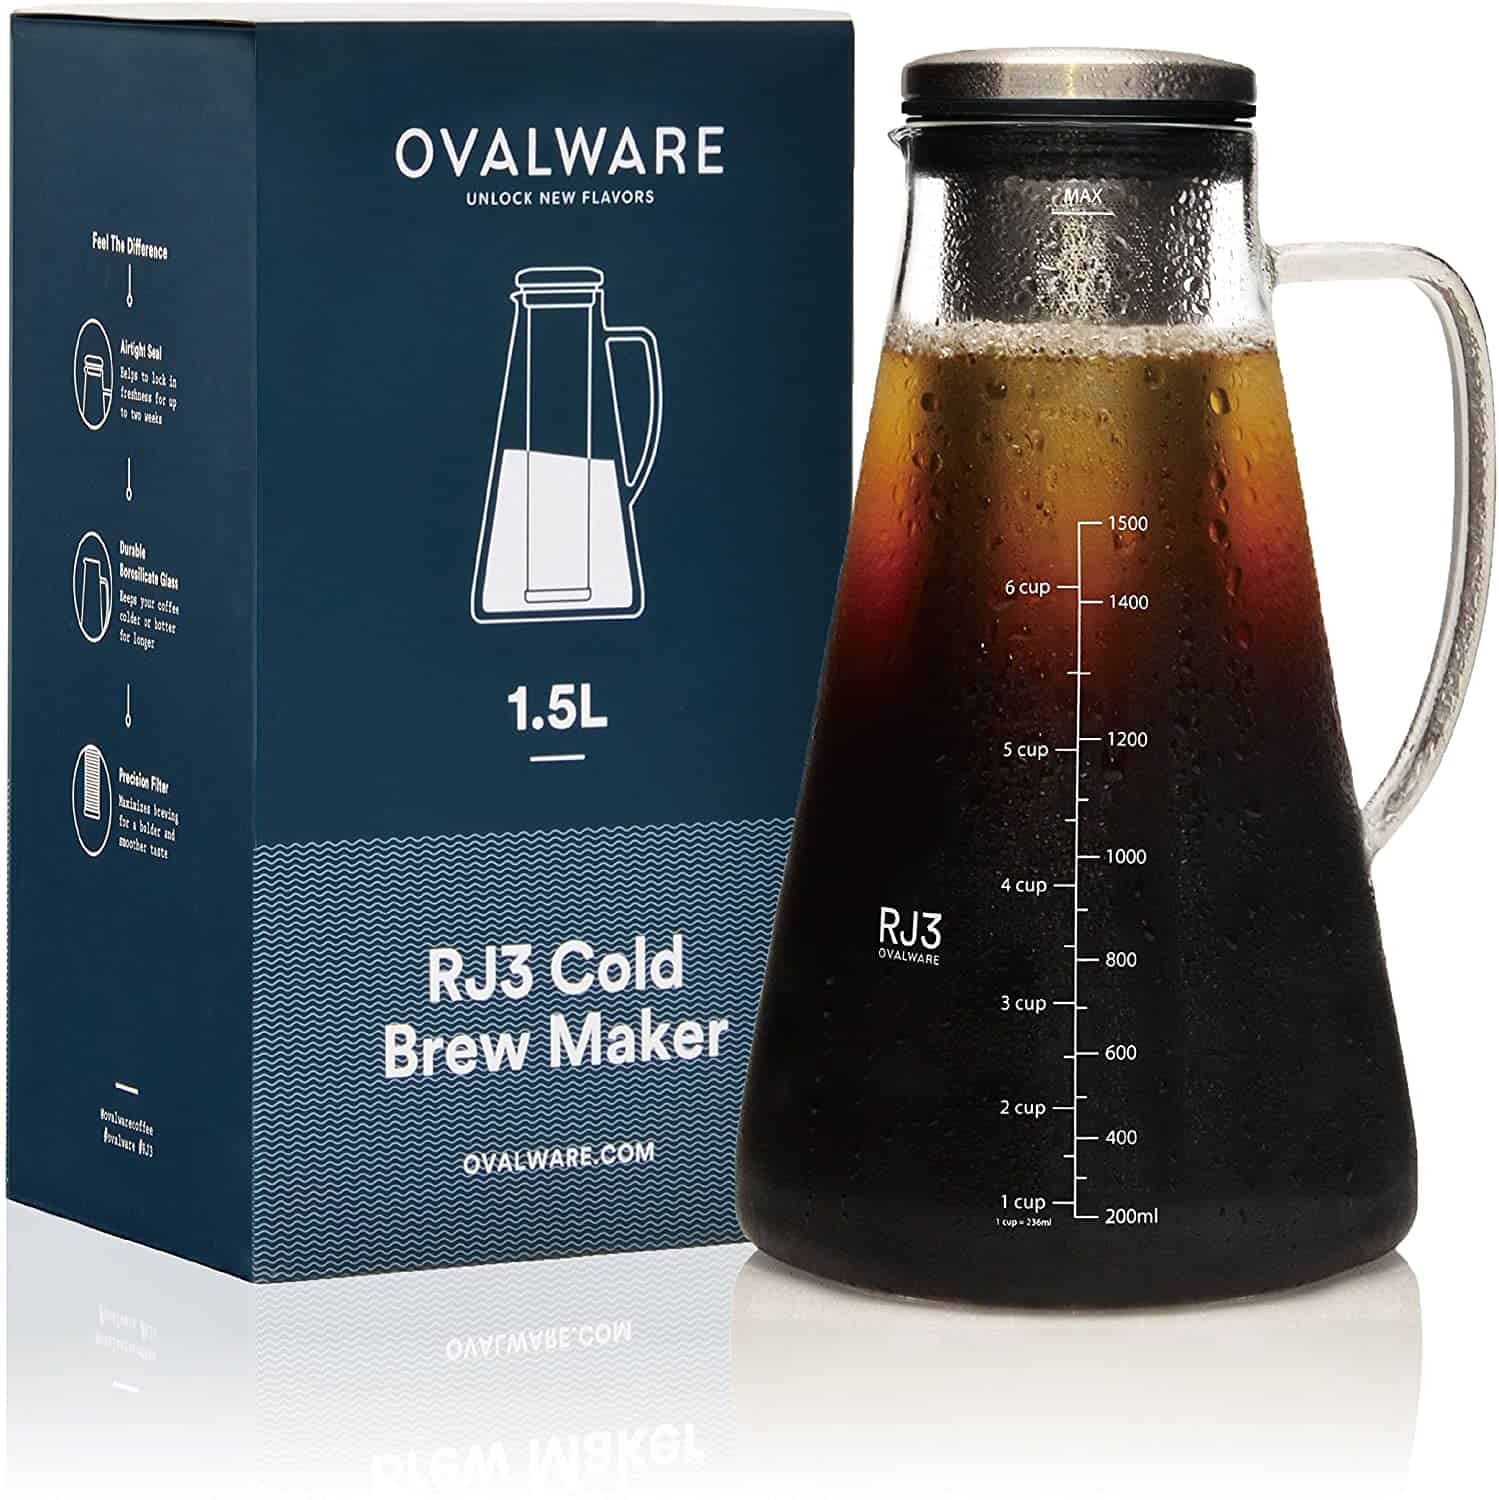 Ovalware RJ3 Cold Brew Maker, Gift Ideas for Coworkers